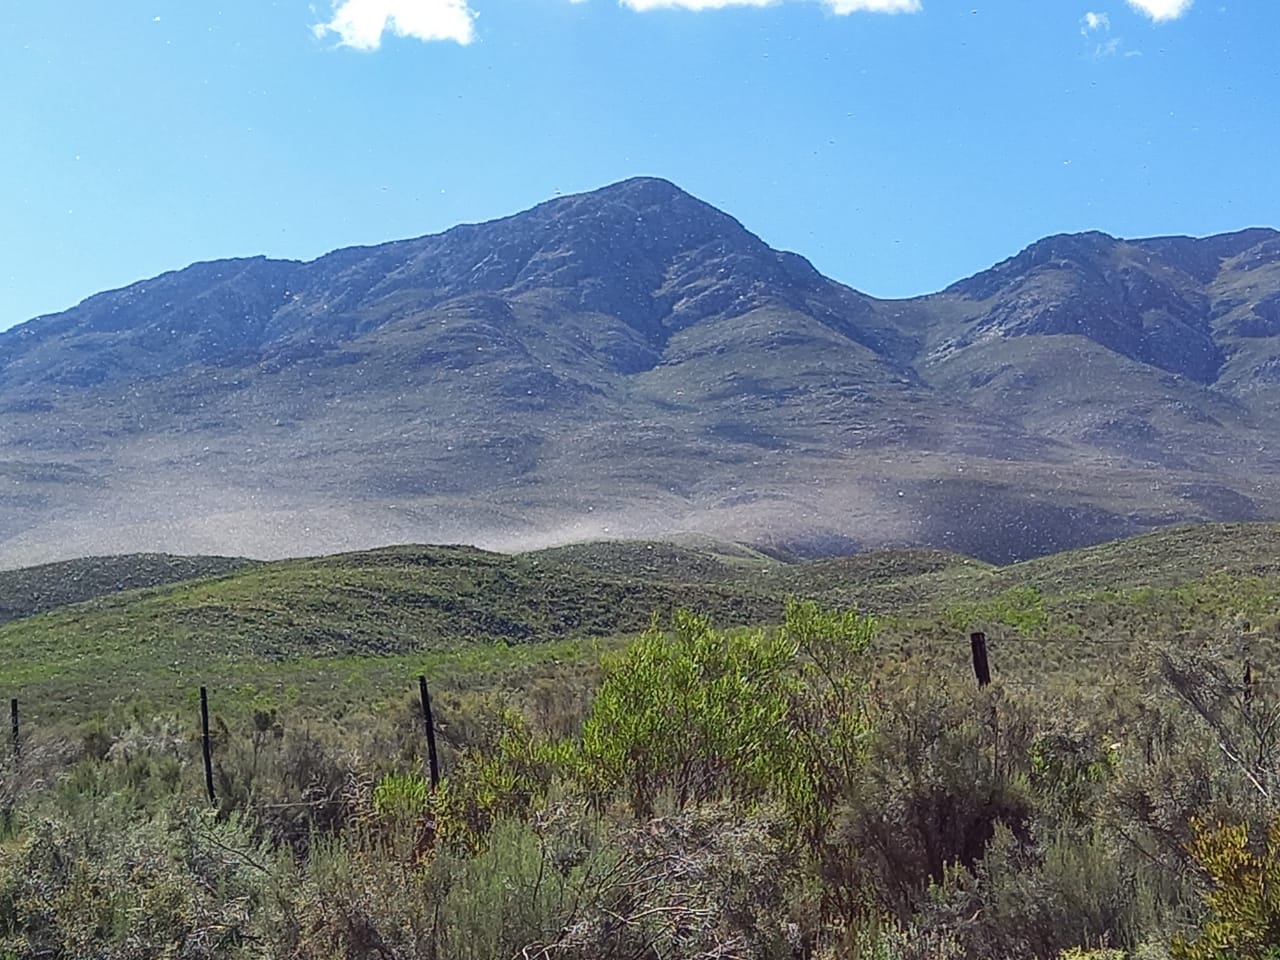 Swarm-of-locusts-sighted-between-Oudtshoorn-and-Ladismith.